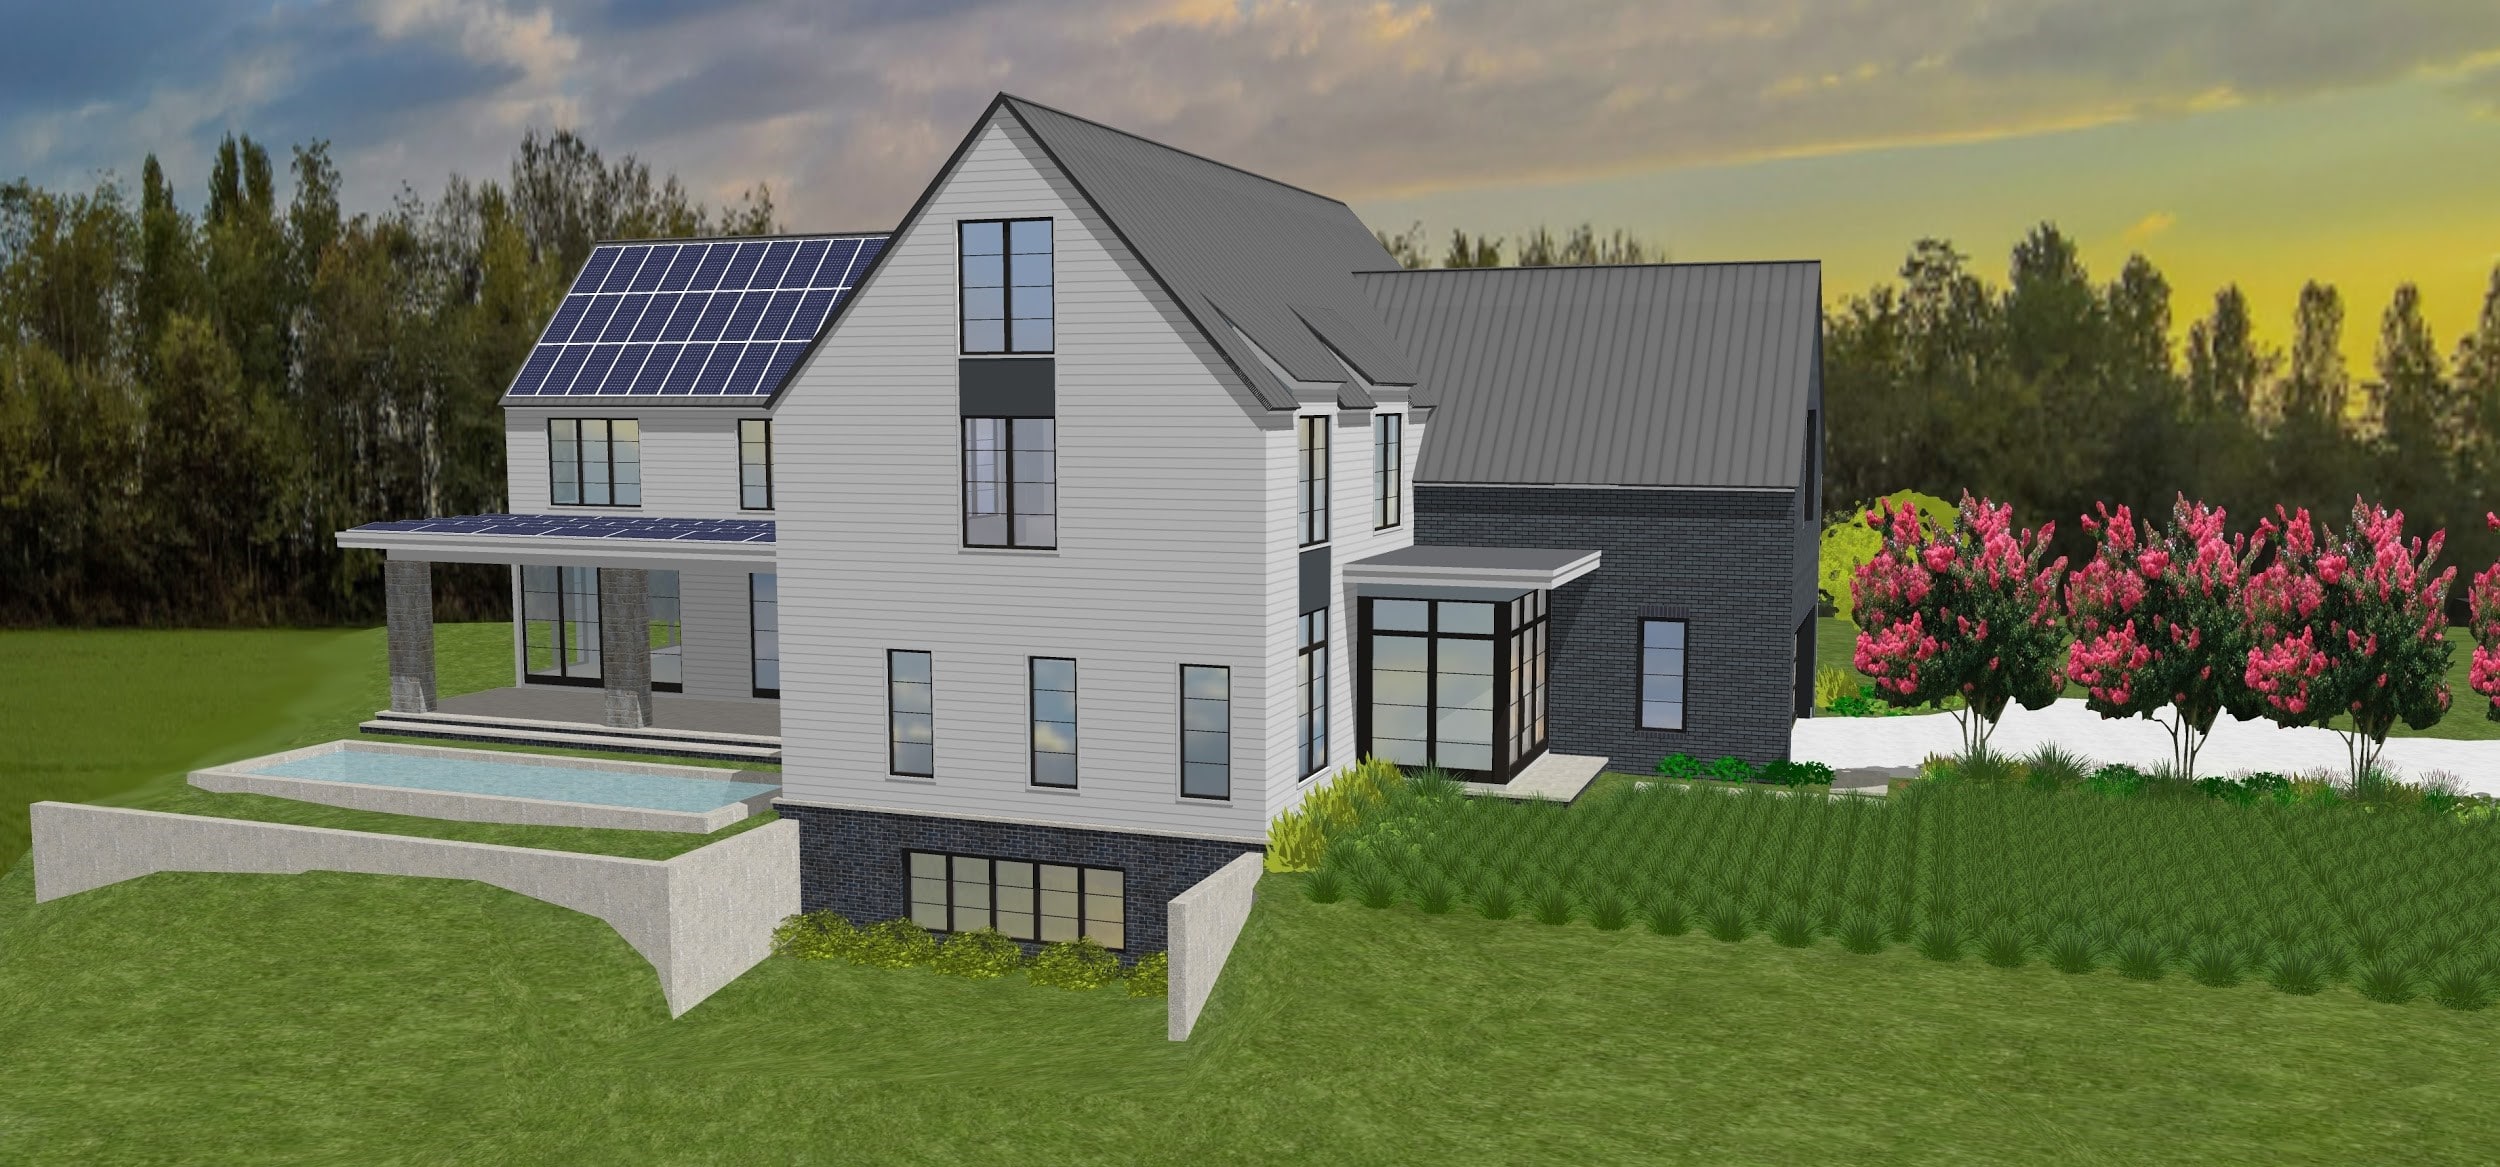 Atlanta Architect, Builder Designs Home to Make Every Day Earth Day